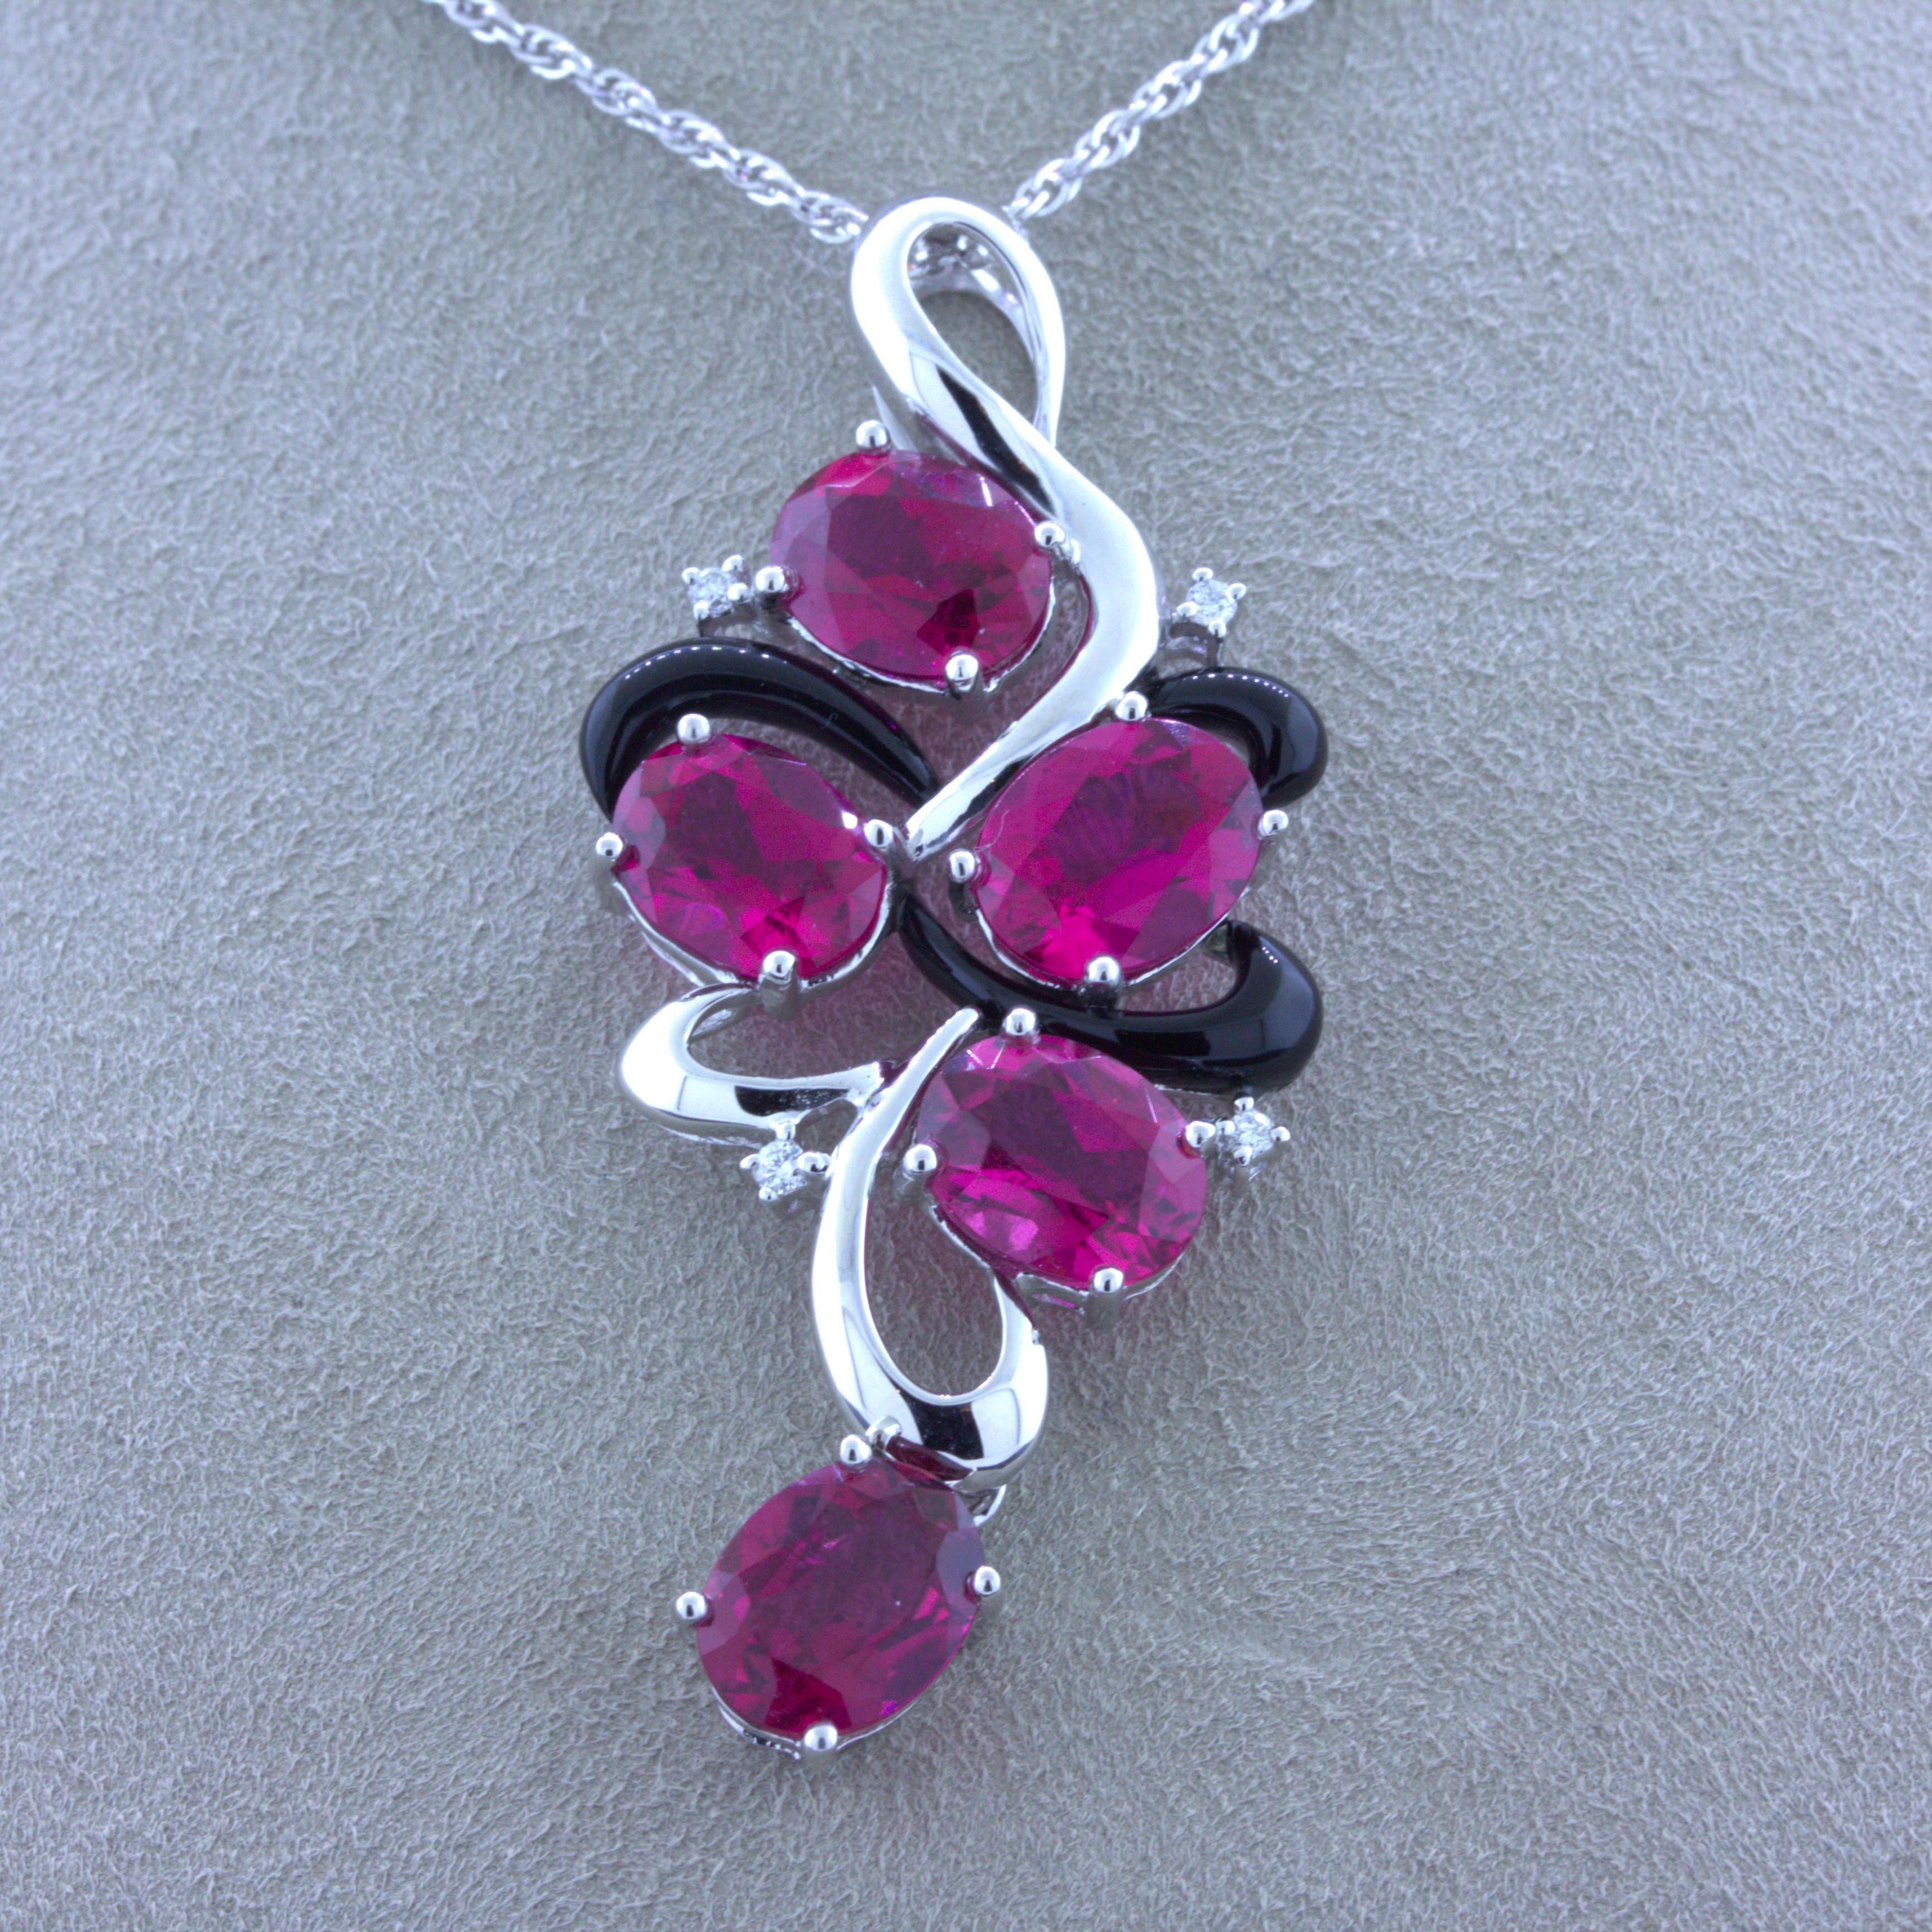 A chic and stylish pendant featuring 5 gem oval shape rubellite tourmaline. They weigh a total of 8.82 carats and have a rich intense deep red color that makes rubellite so desirable. They are complemented by 0.08 carats of round brilliant-cut